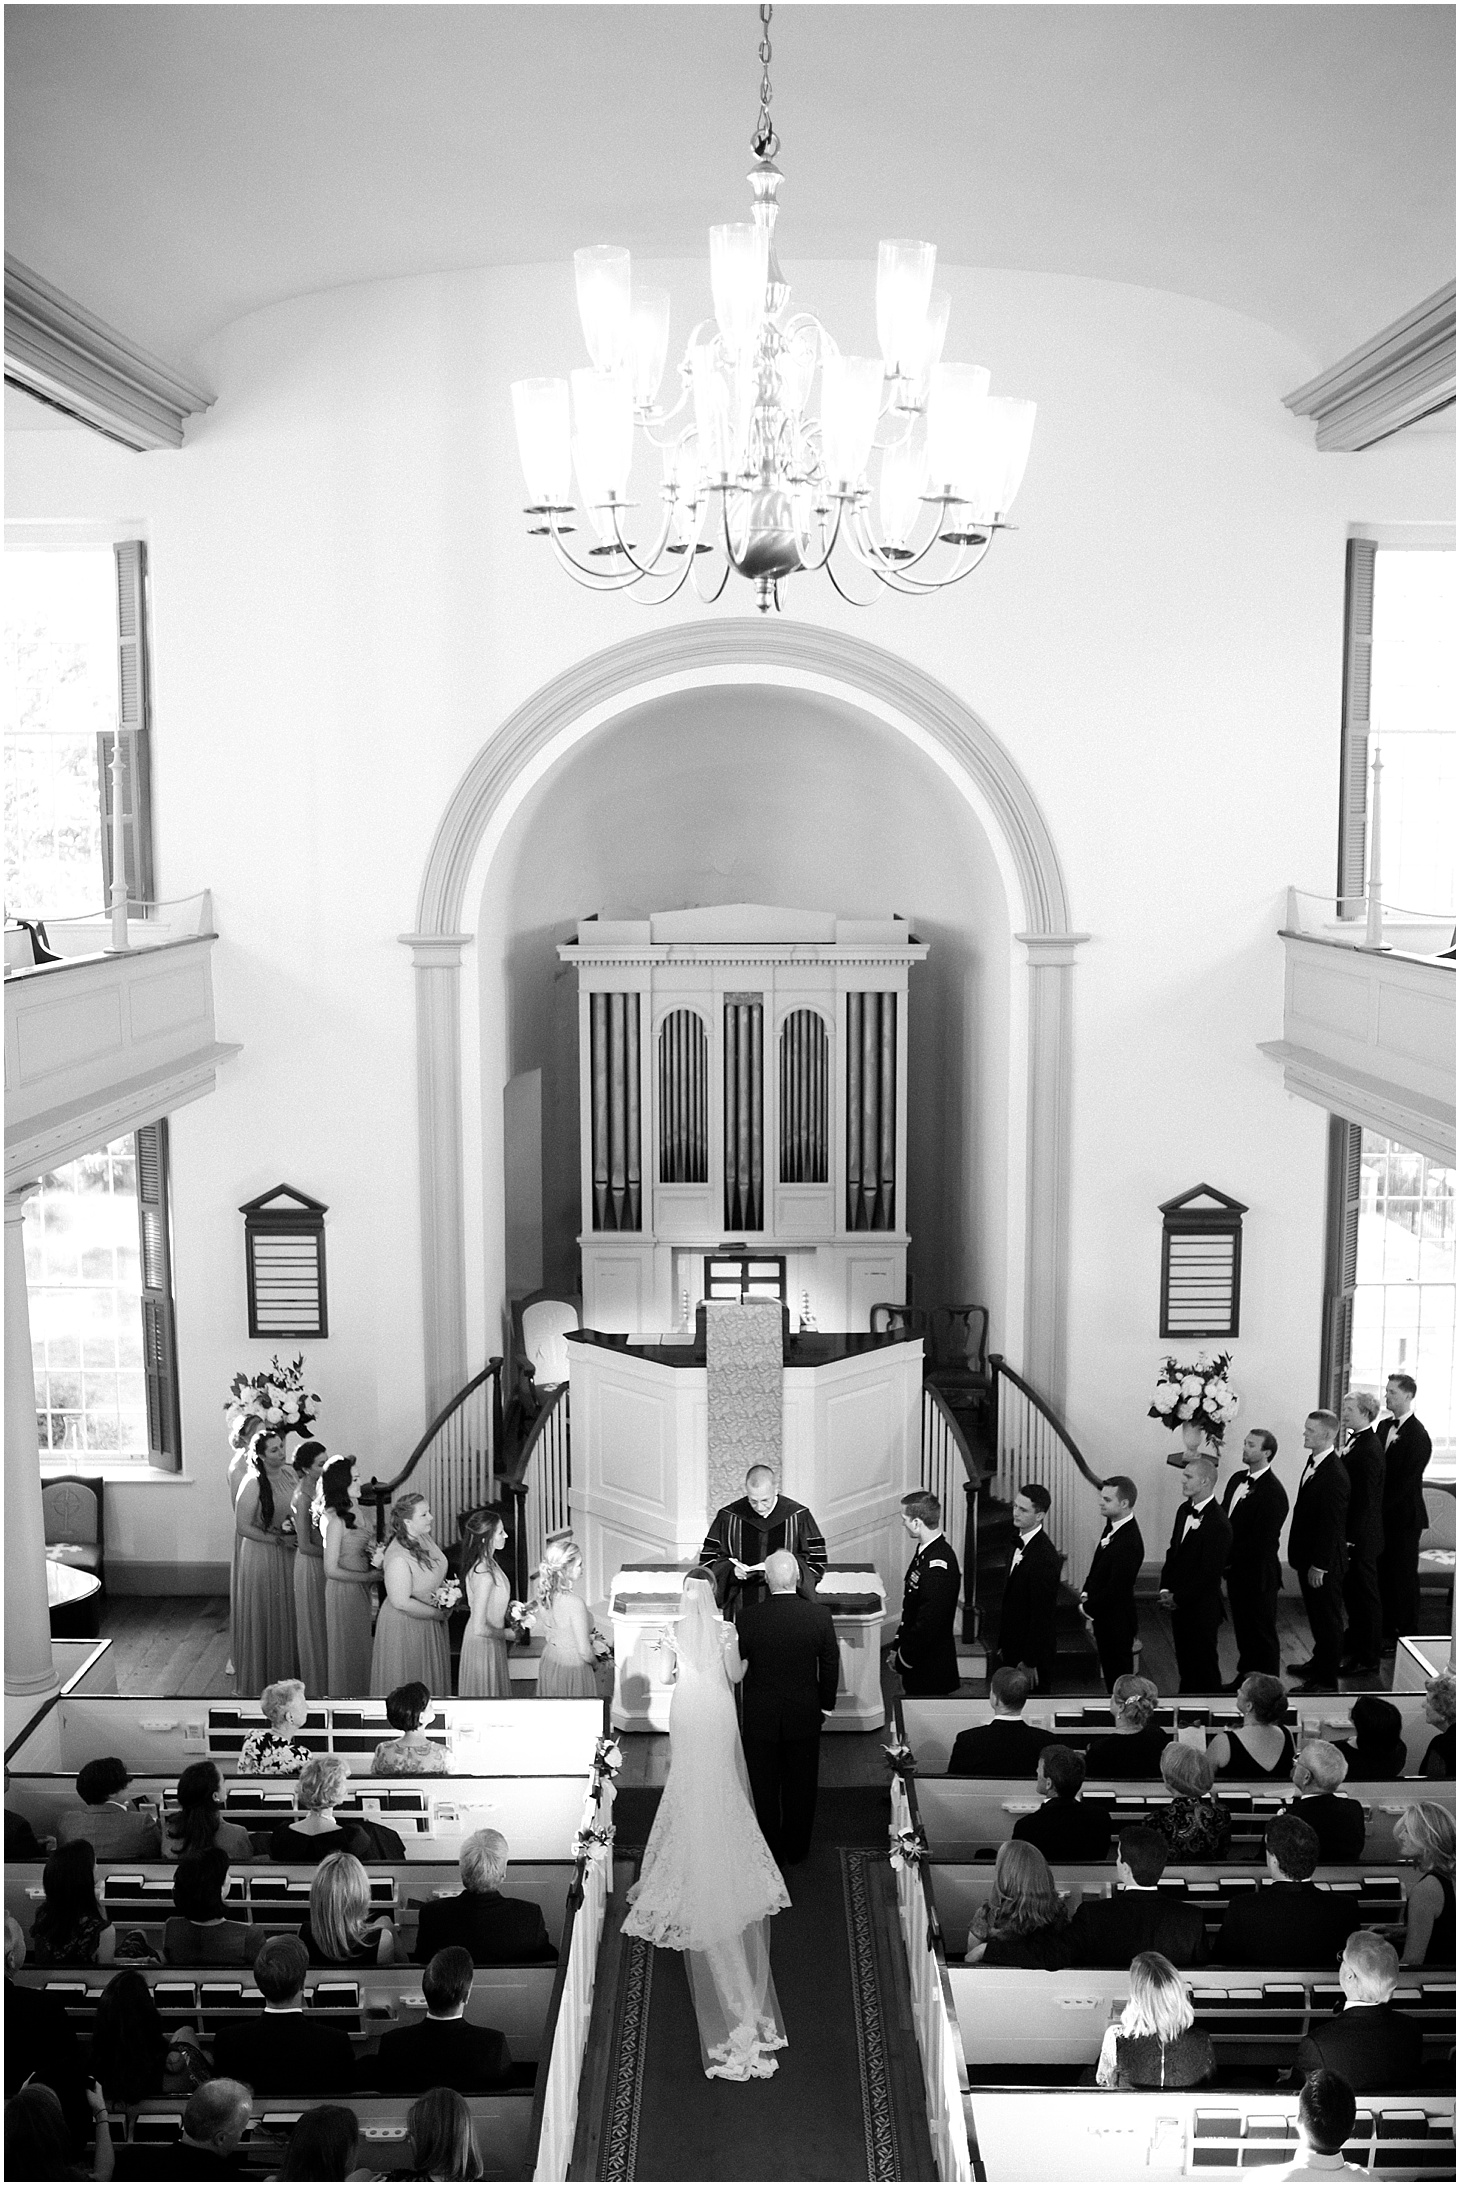 Old Presbyterian Meeting House Ceremony | Southern Black Tie wedding at St. Regis DC in Dusty Blue and Ivory | Sarah Bradshaw Photography